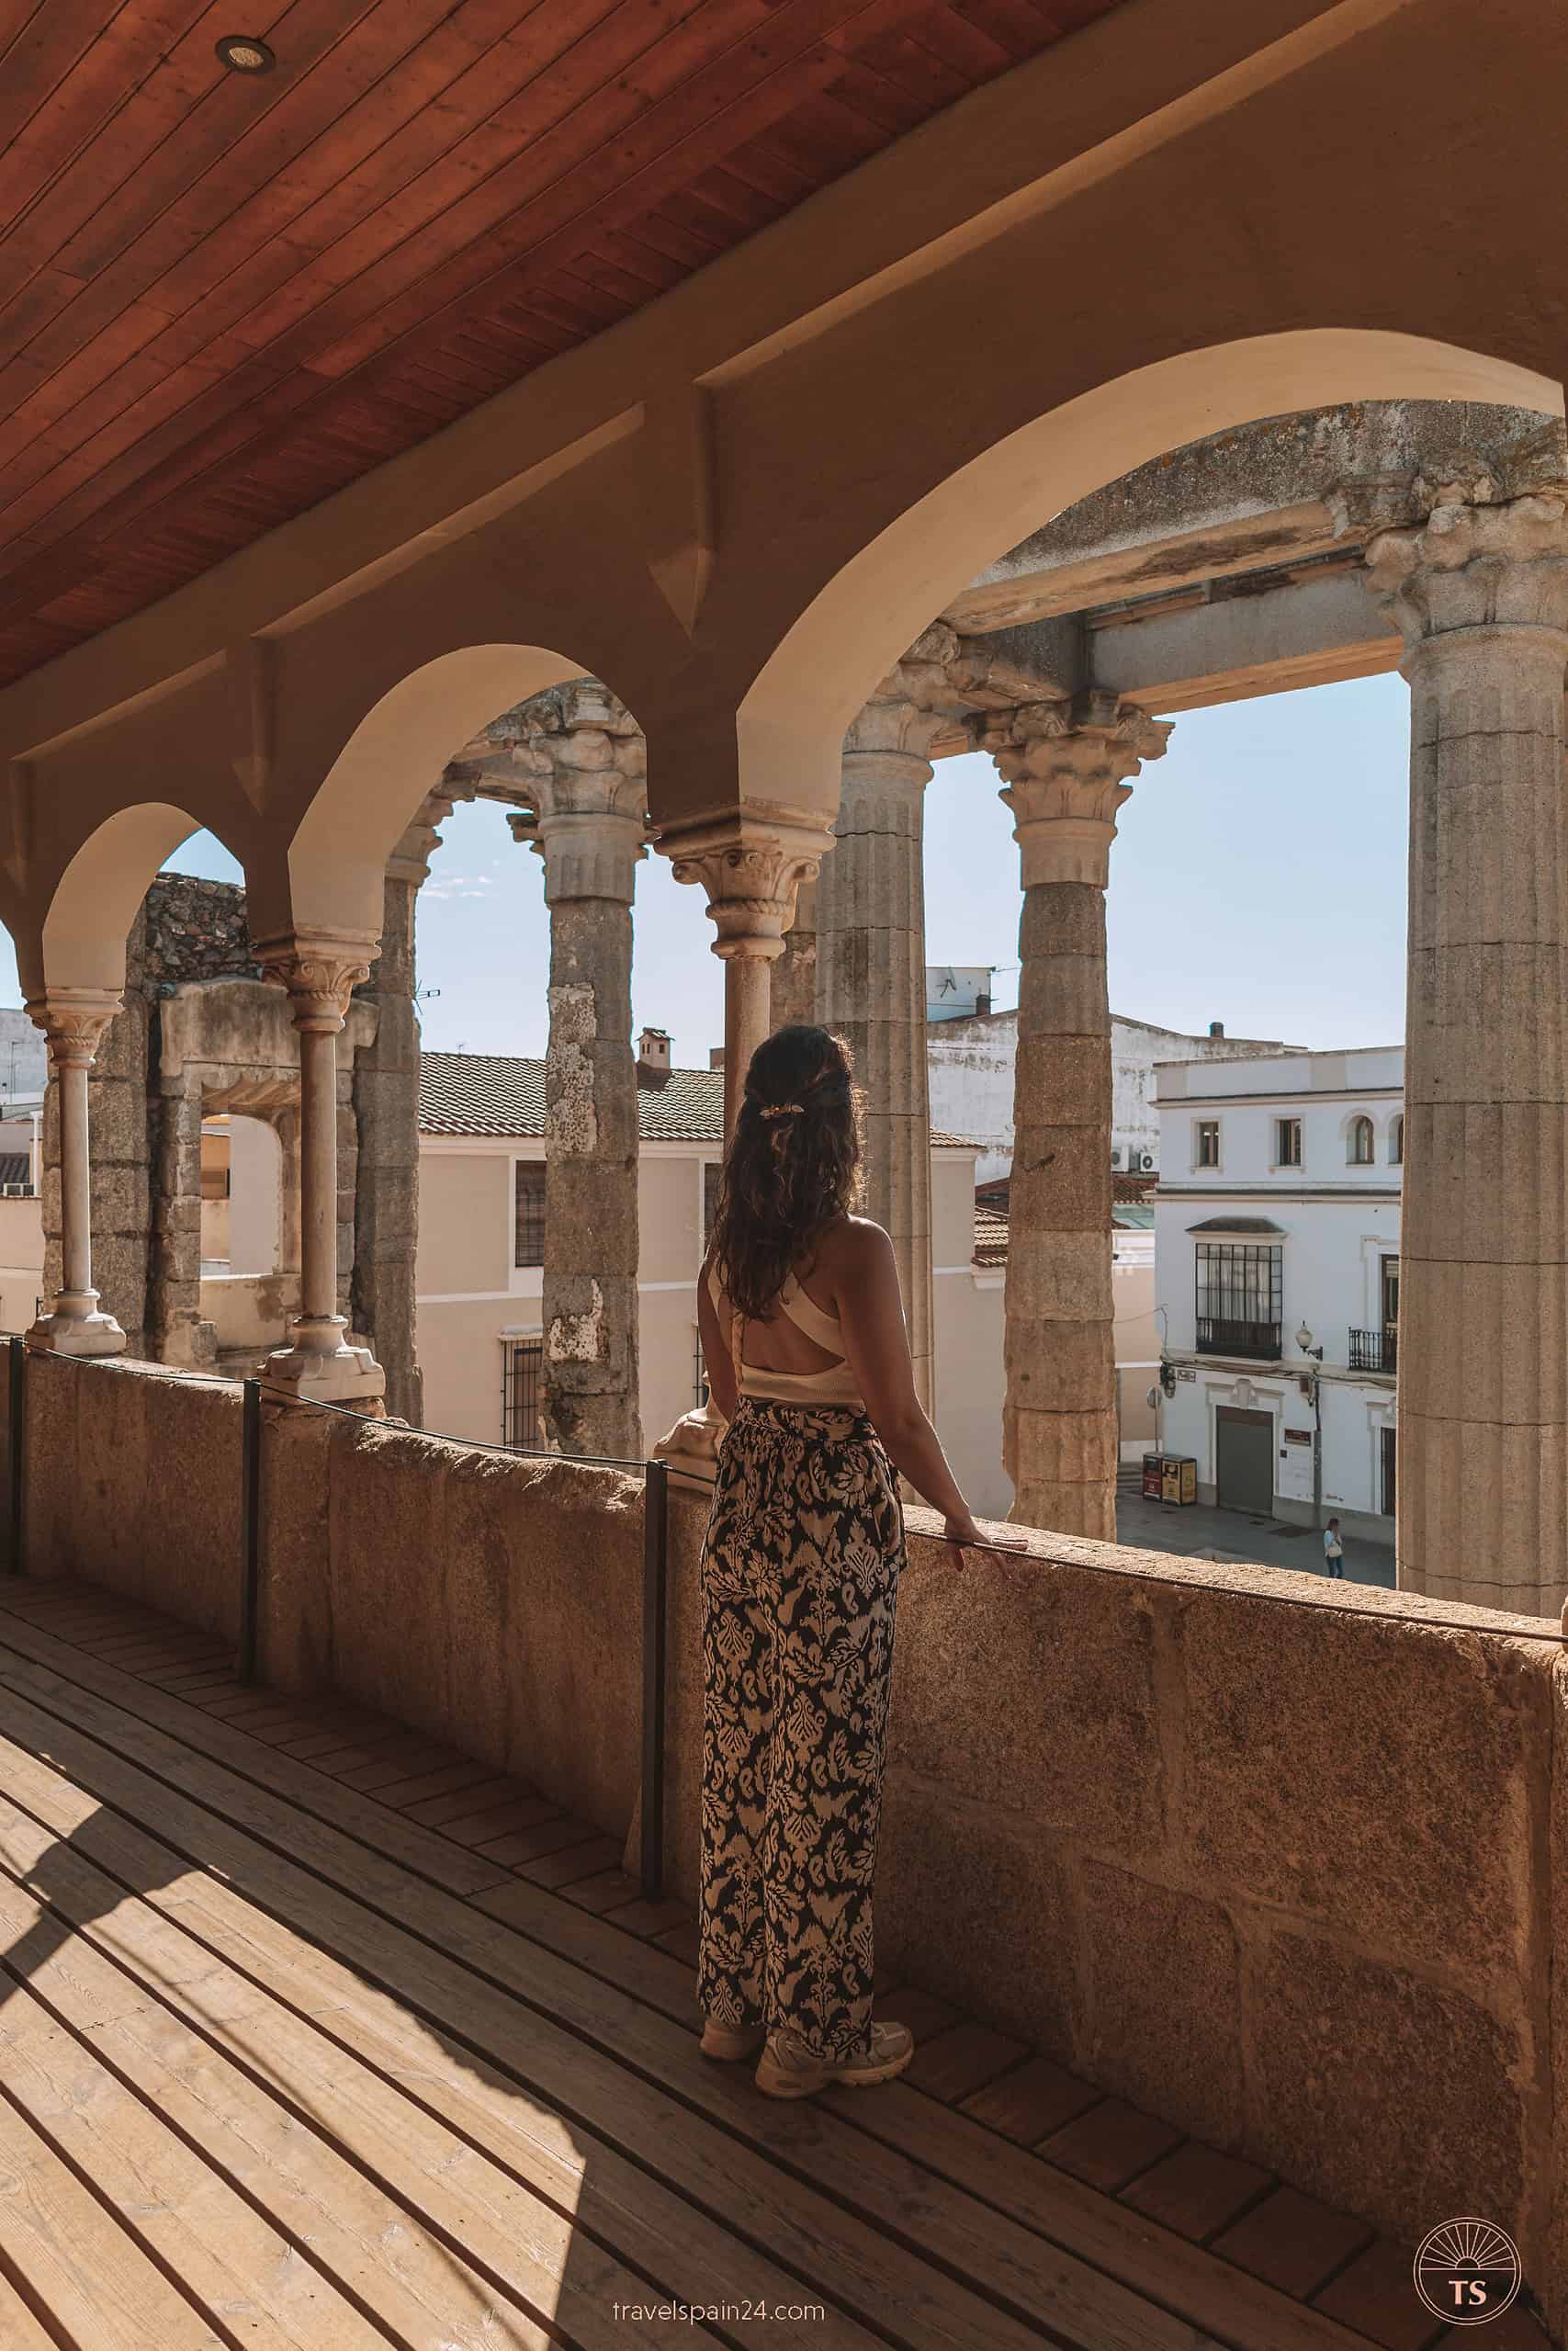 Filipa Ferreira standing on a balcony at Palacio de los Corbos in Mérida, overlooking the Temple of Diana, enjoying the sunny day and the historical view.